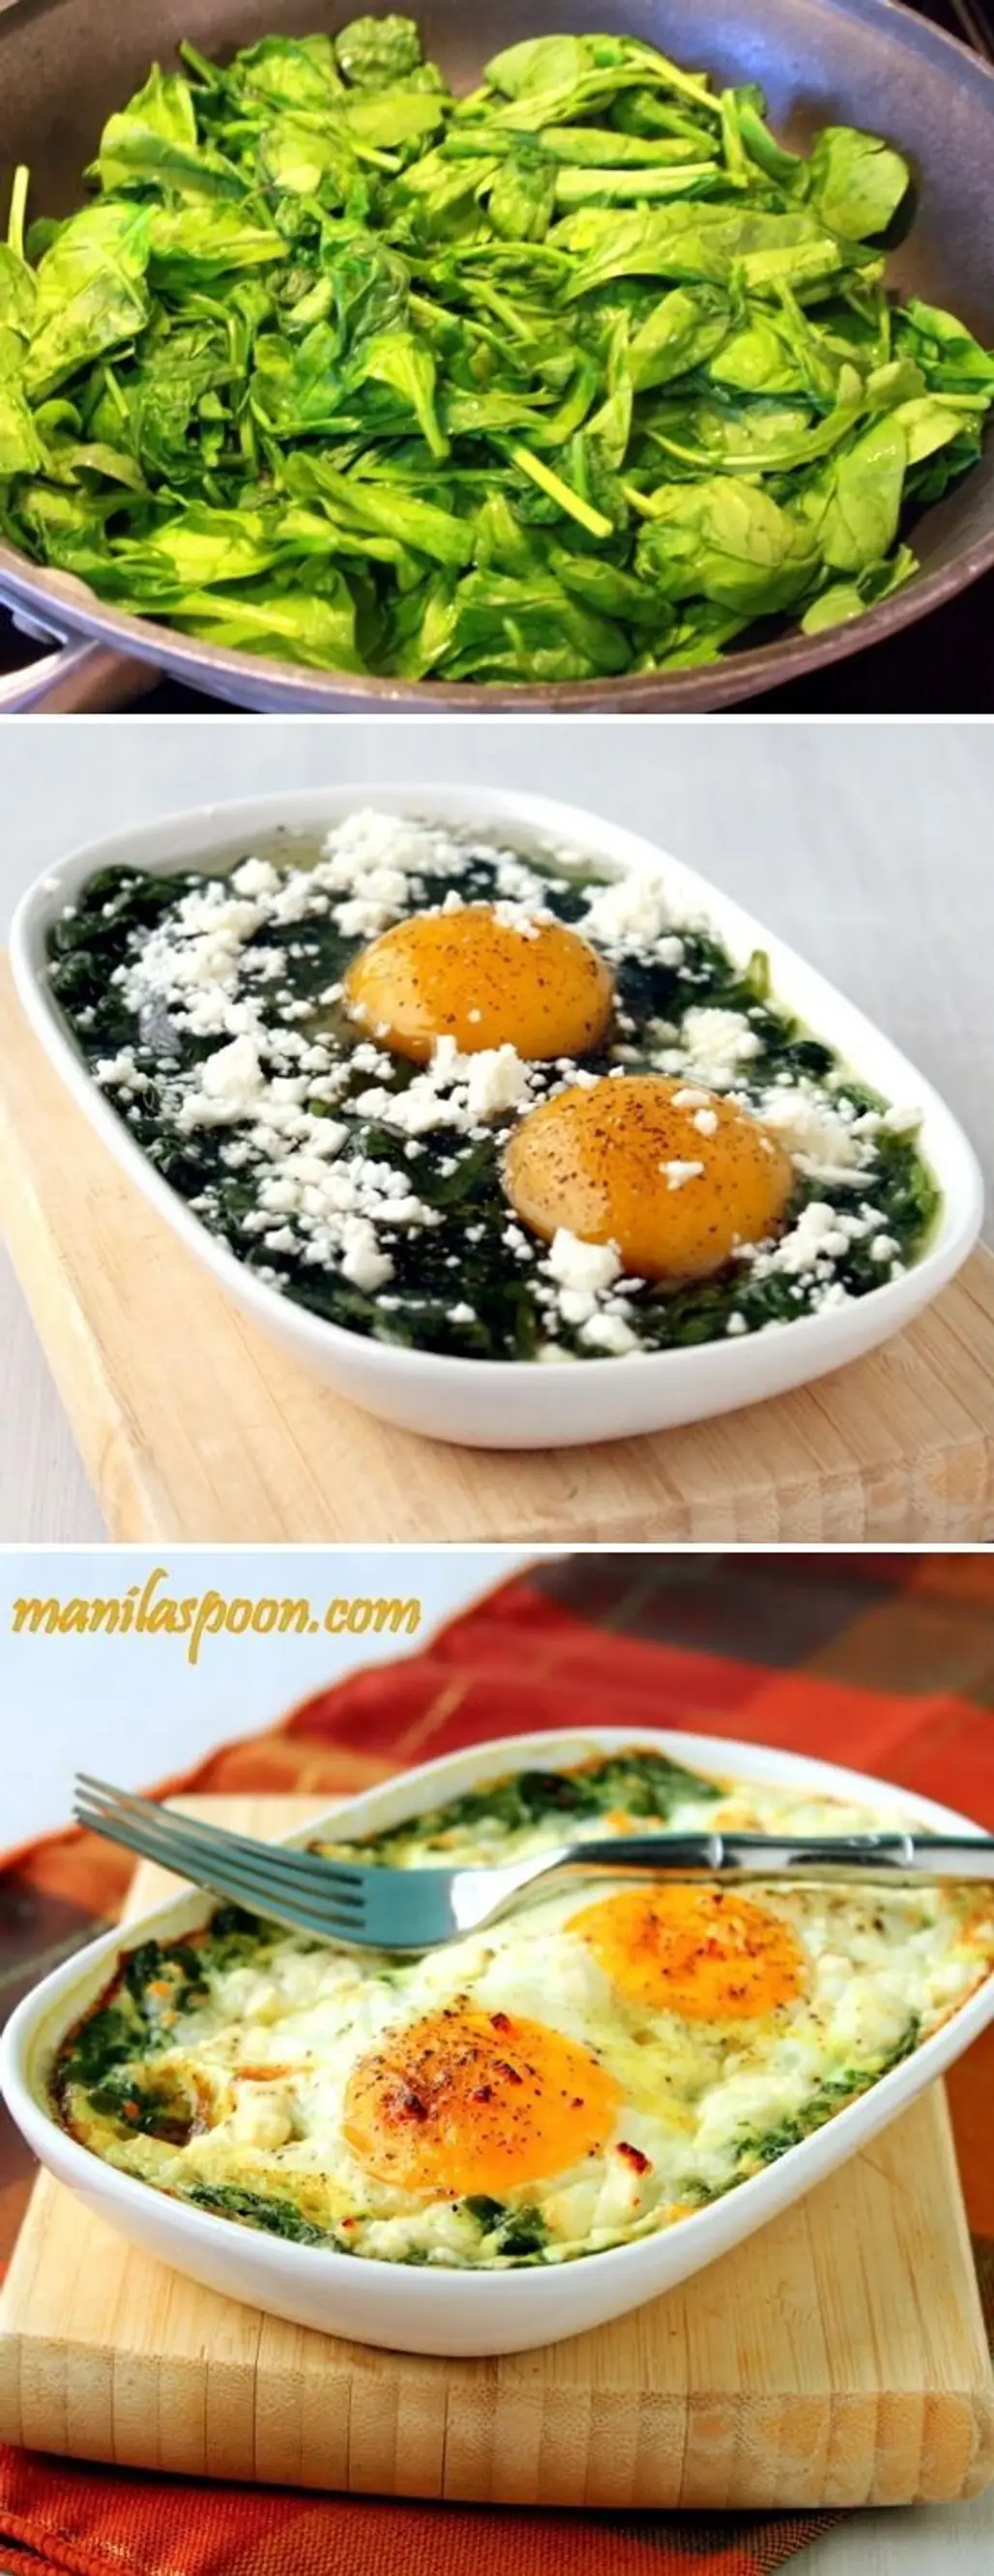 Baked Spinach Eggs